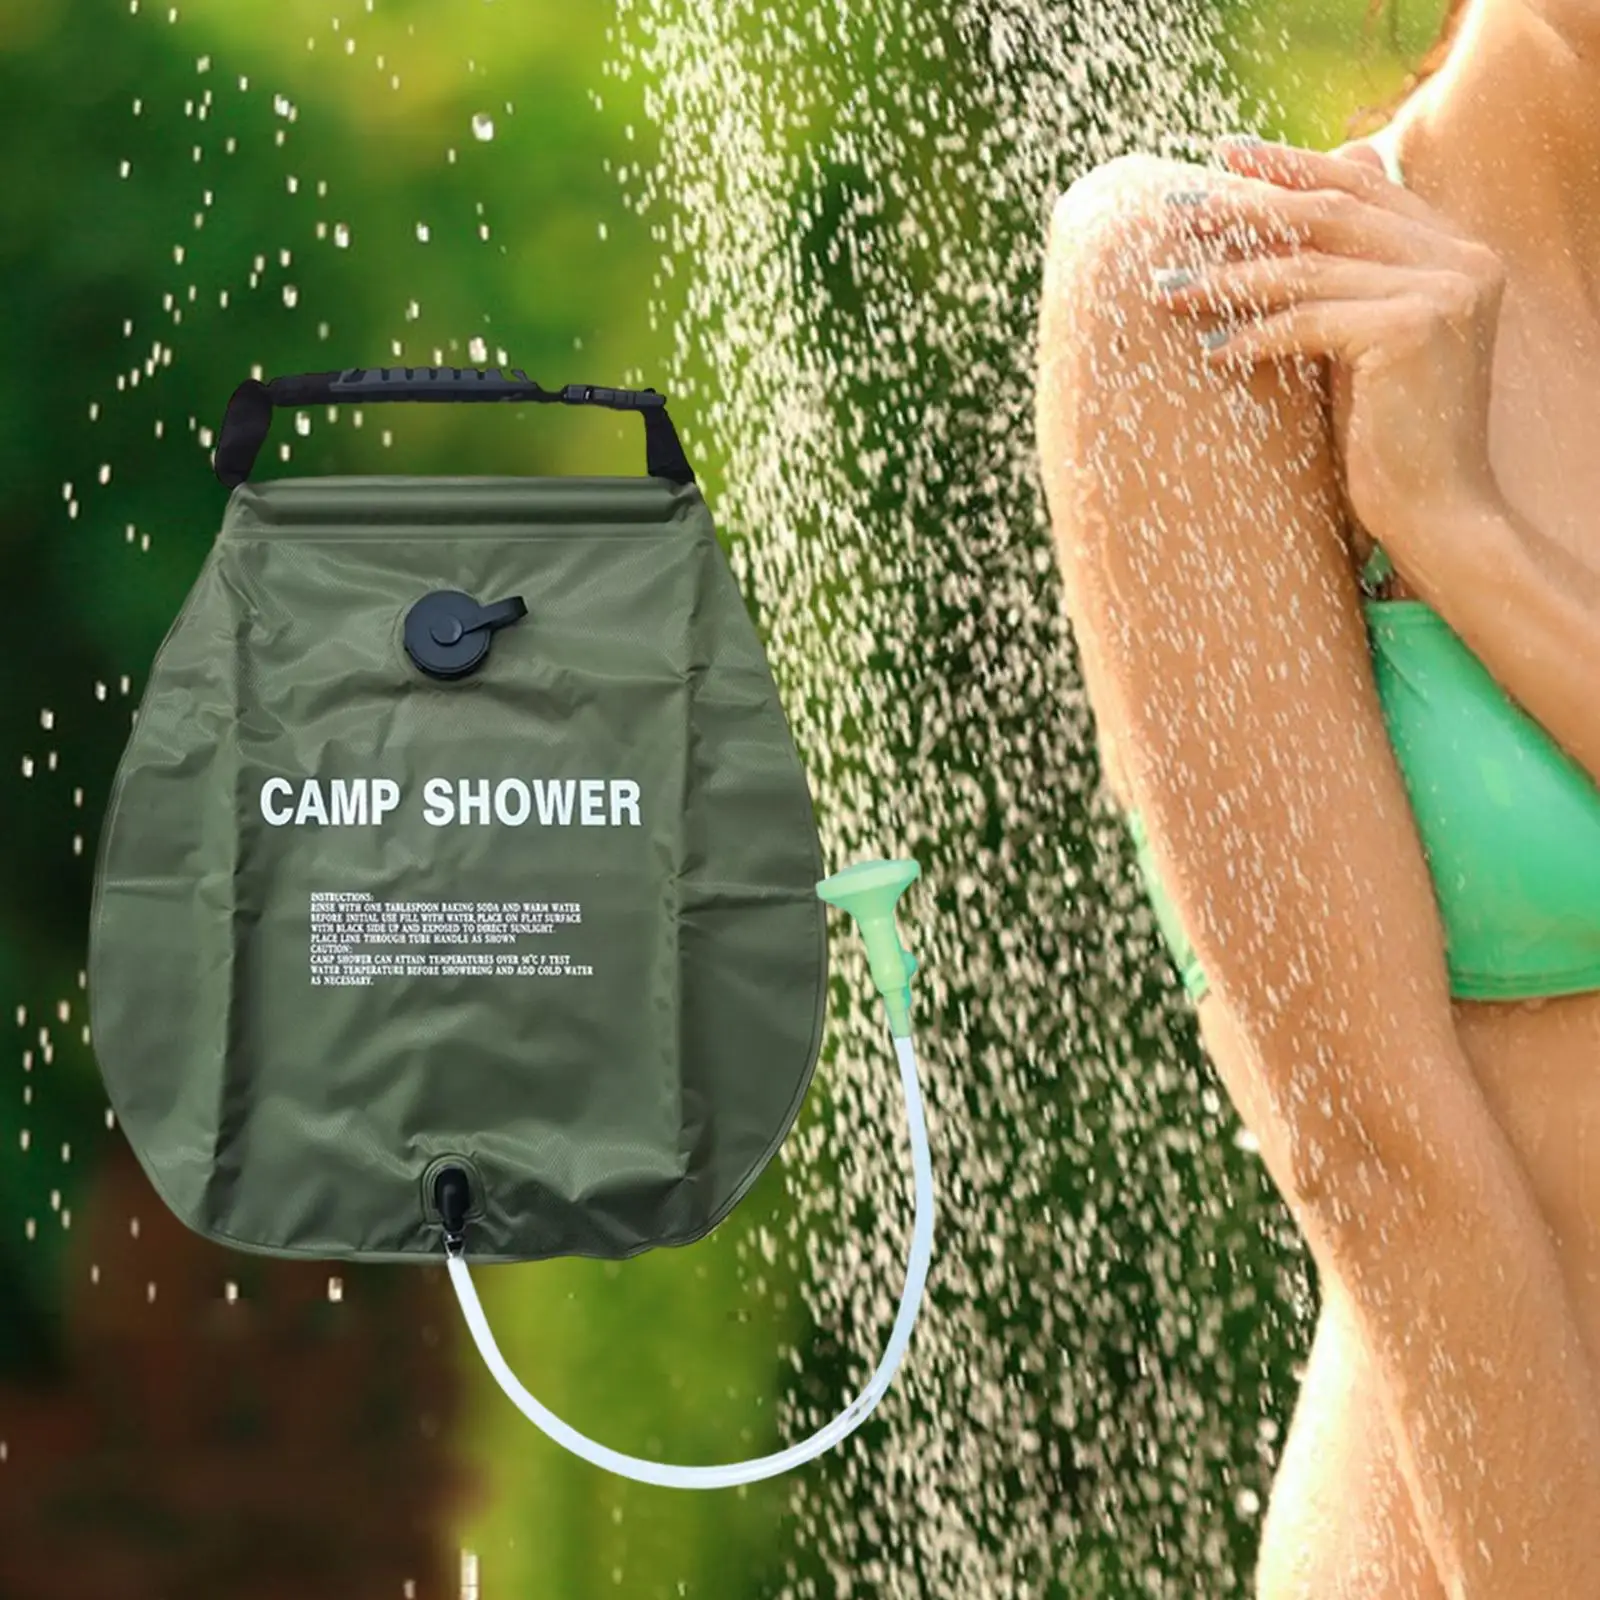 Solar Shower Bag 5 Gallon Durable with Exterior Pocket for Traveling Summer